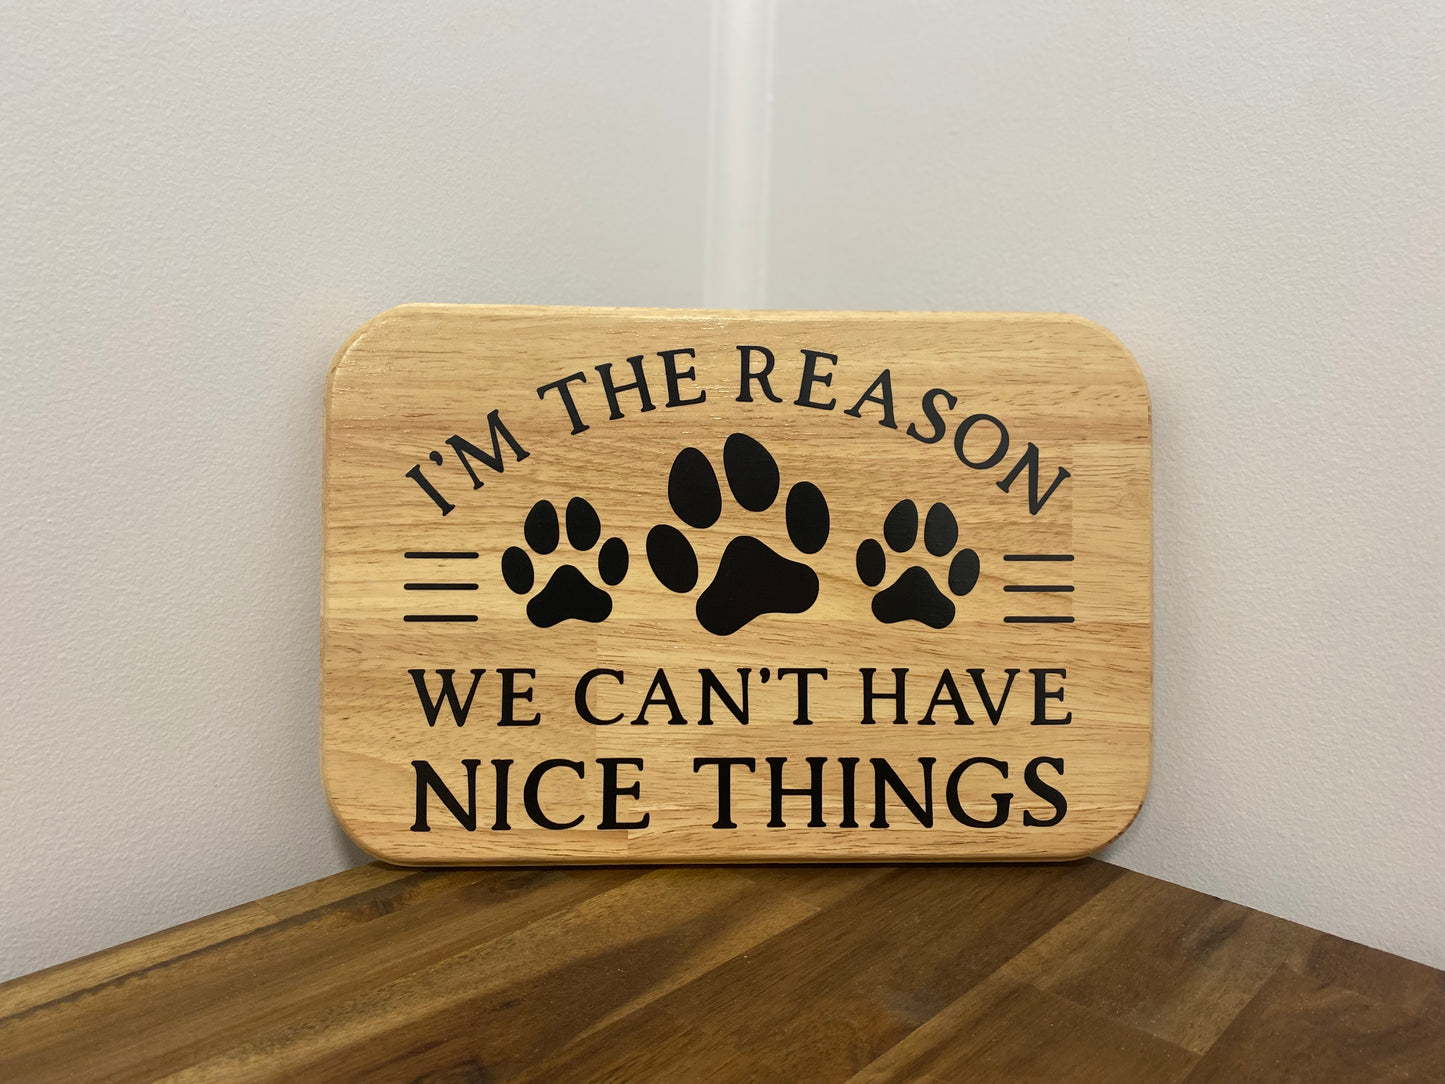 I’m the reason we can’t have nice things | 20cm x 30cm